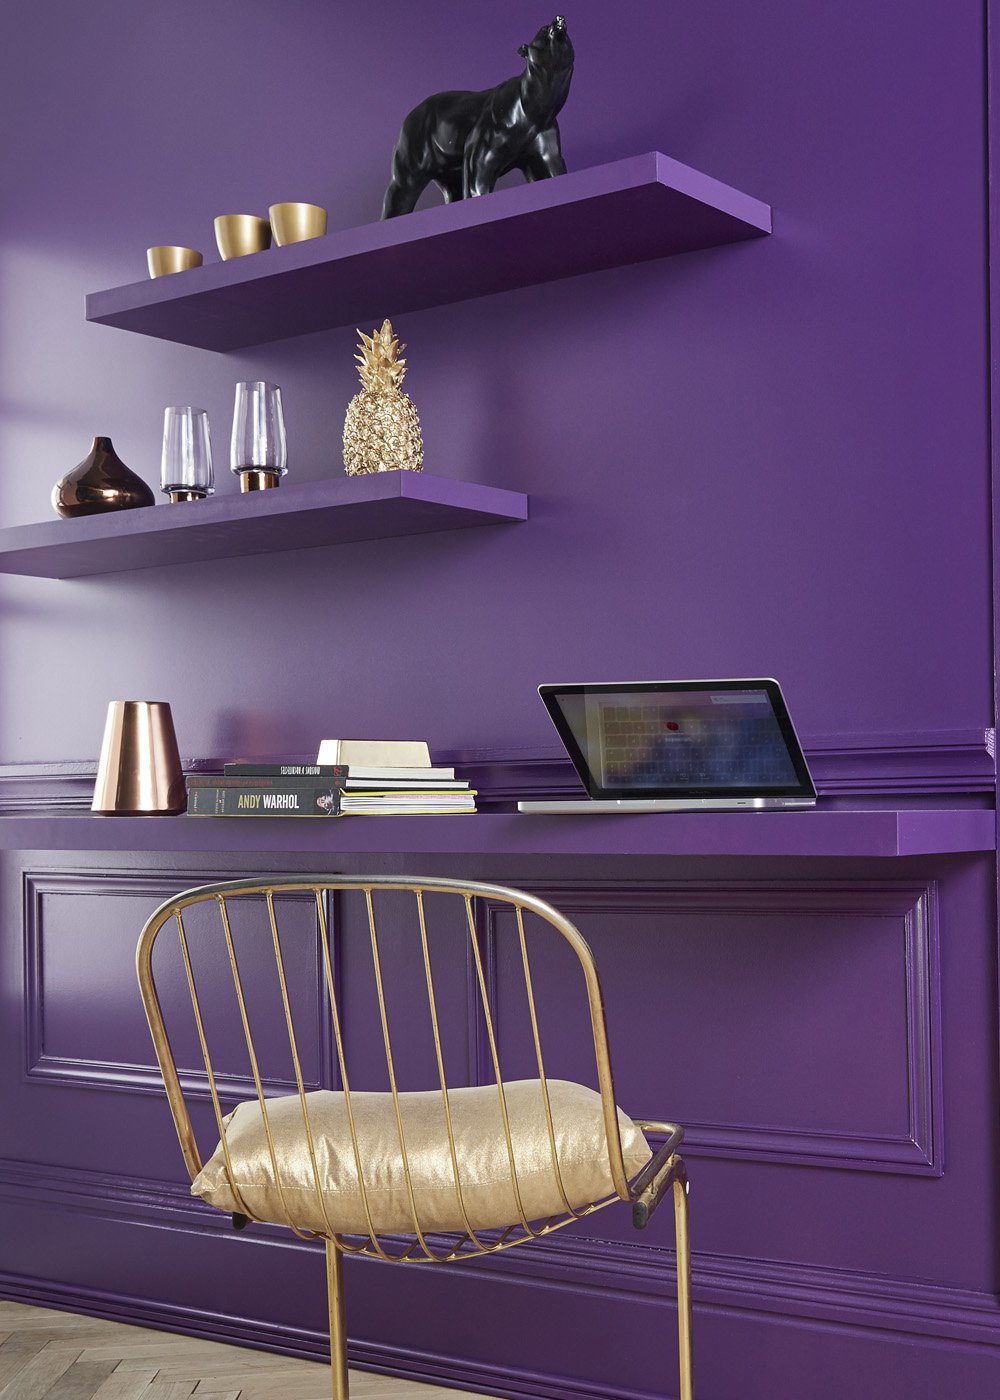 Pantone Colour of the Year 2018 Blog - Ultra Violet 18-3838 - 6 (MarieClaire)